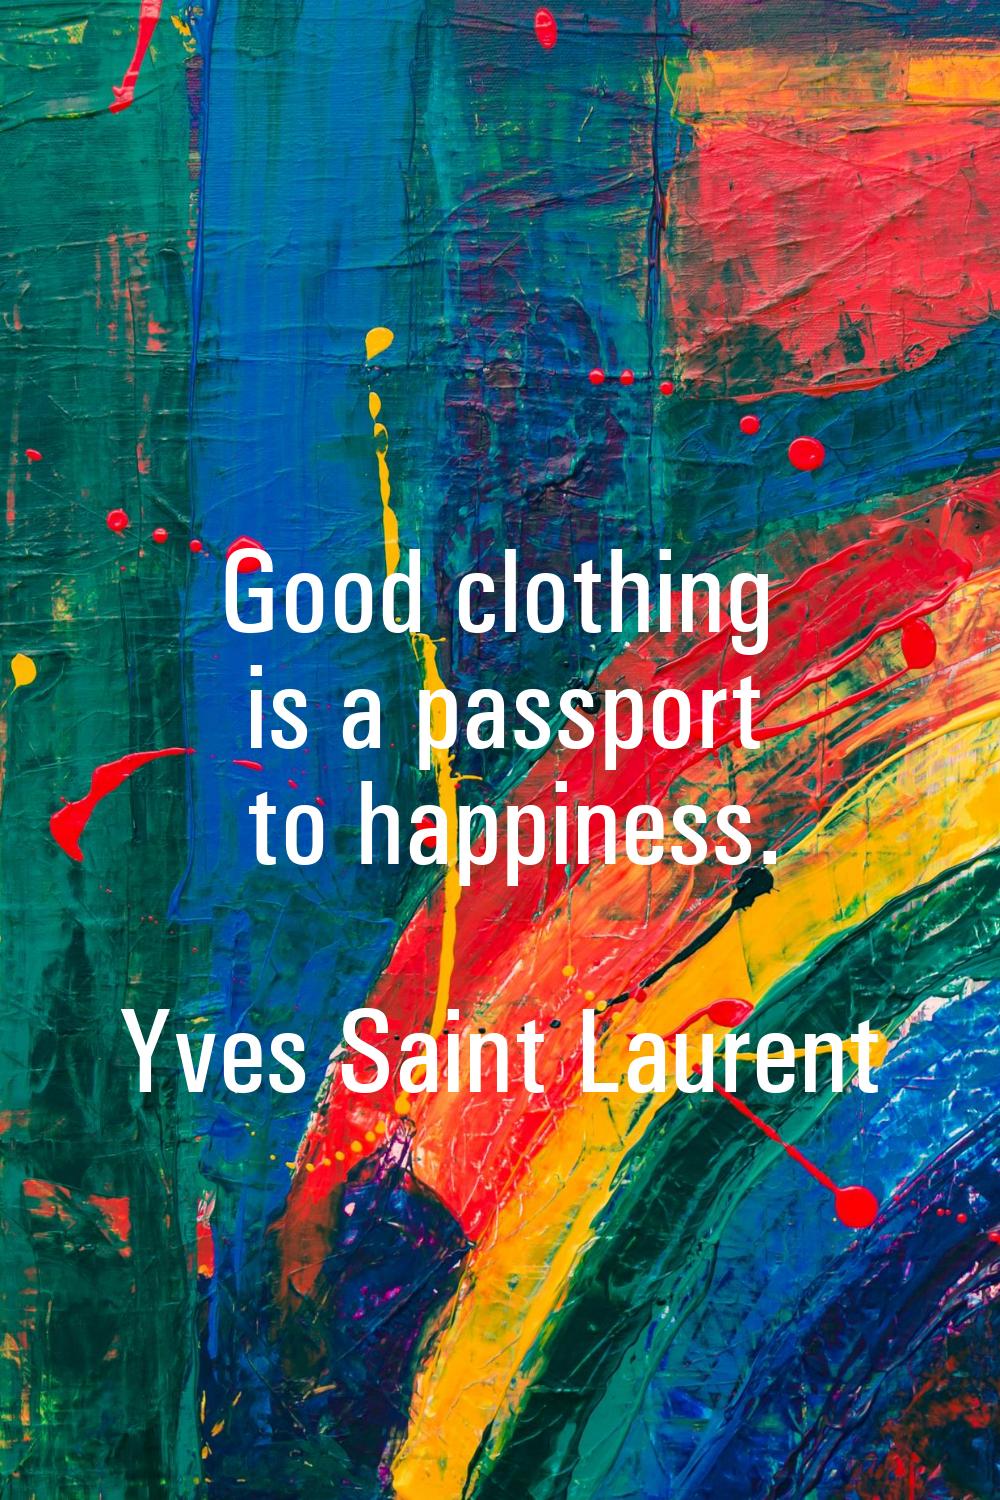 Good clothing is a passport to happiness.